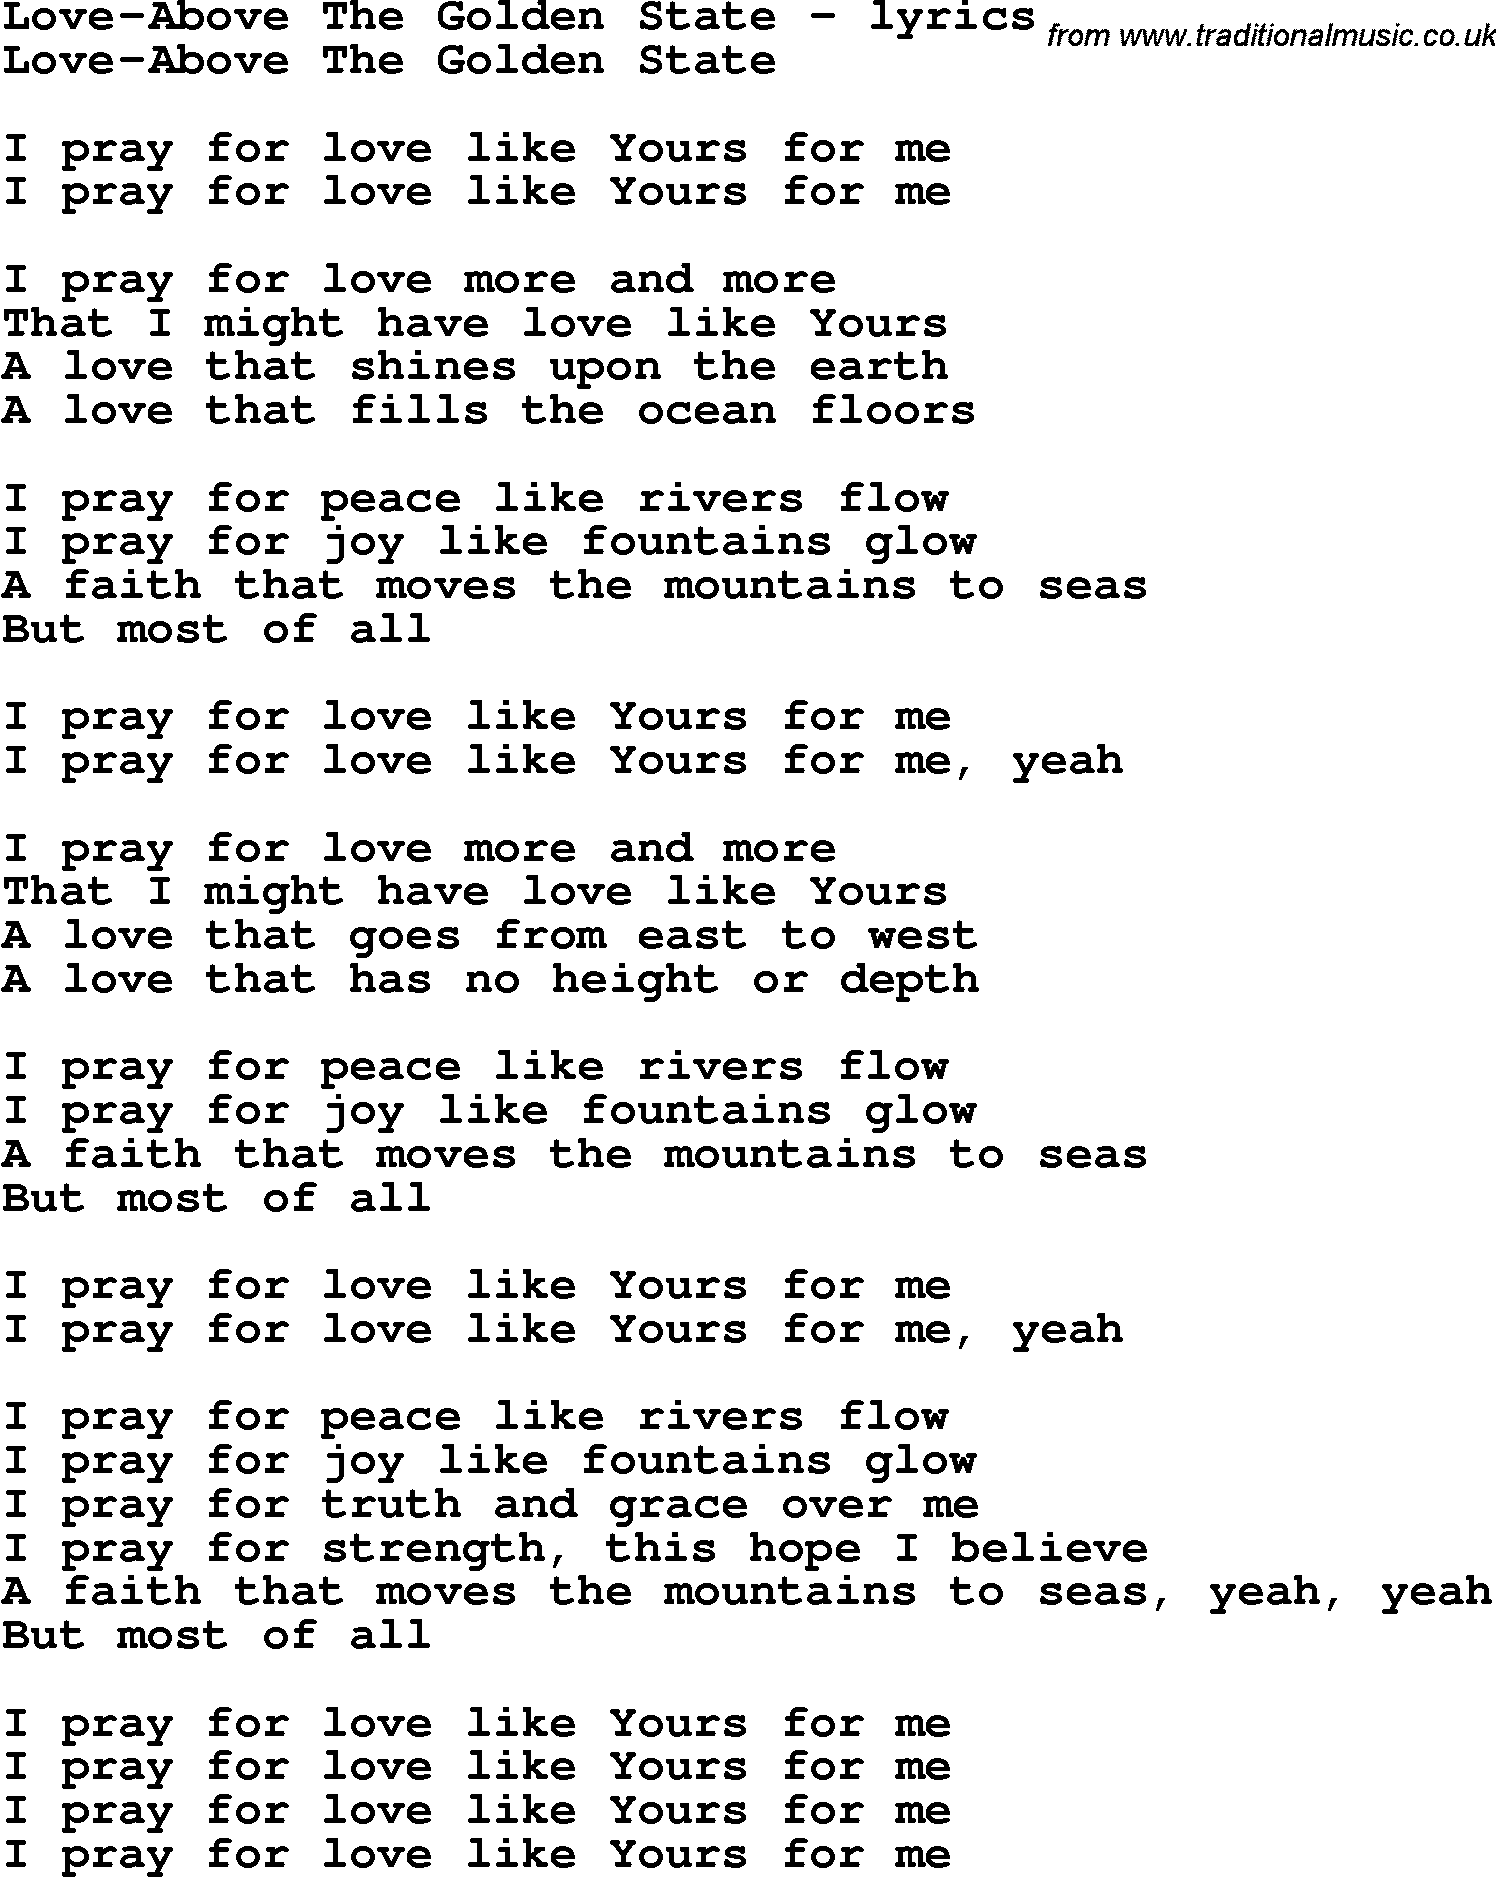 Love Song Lyrics for: Love-Above The Golden State